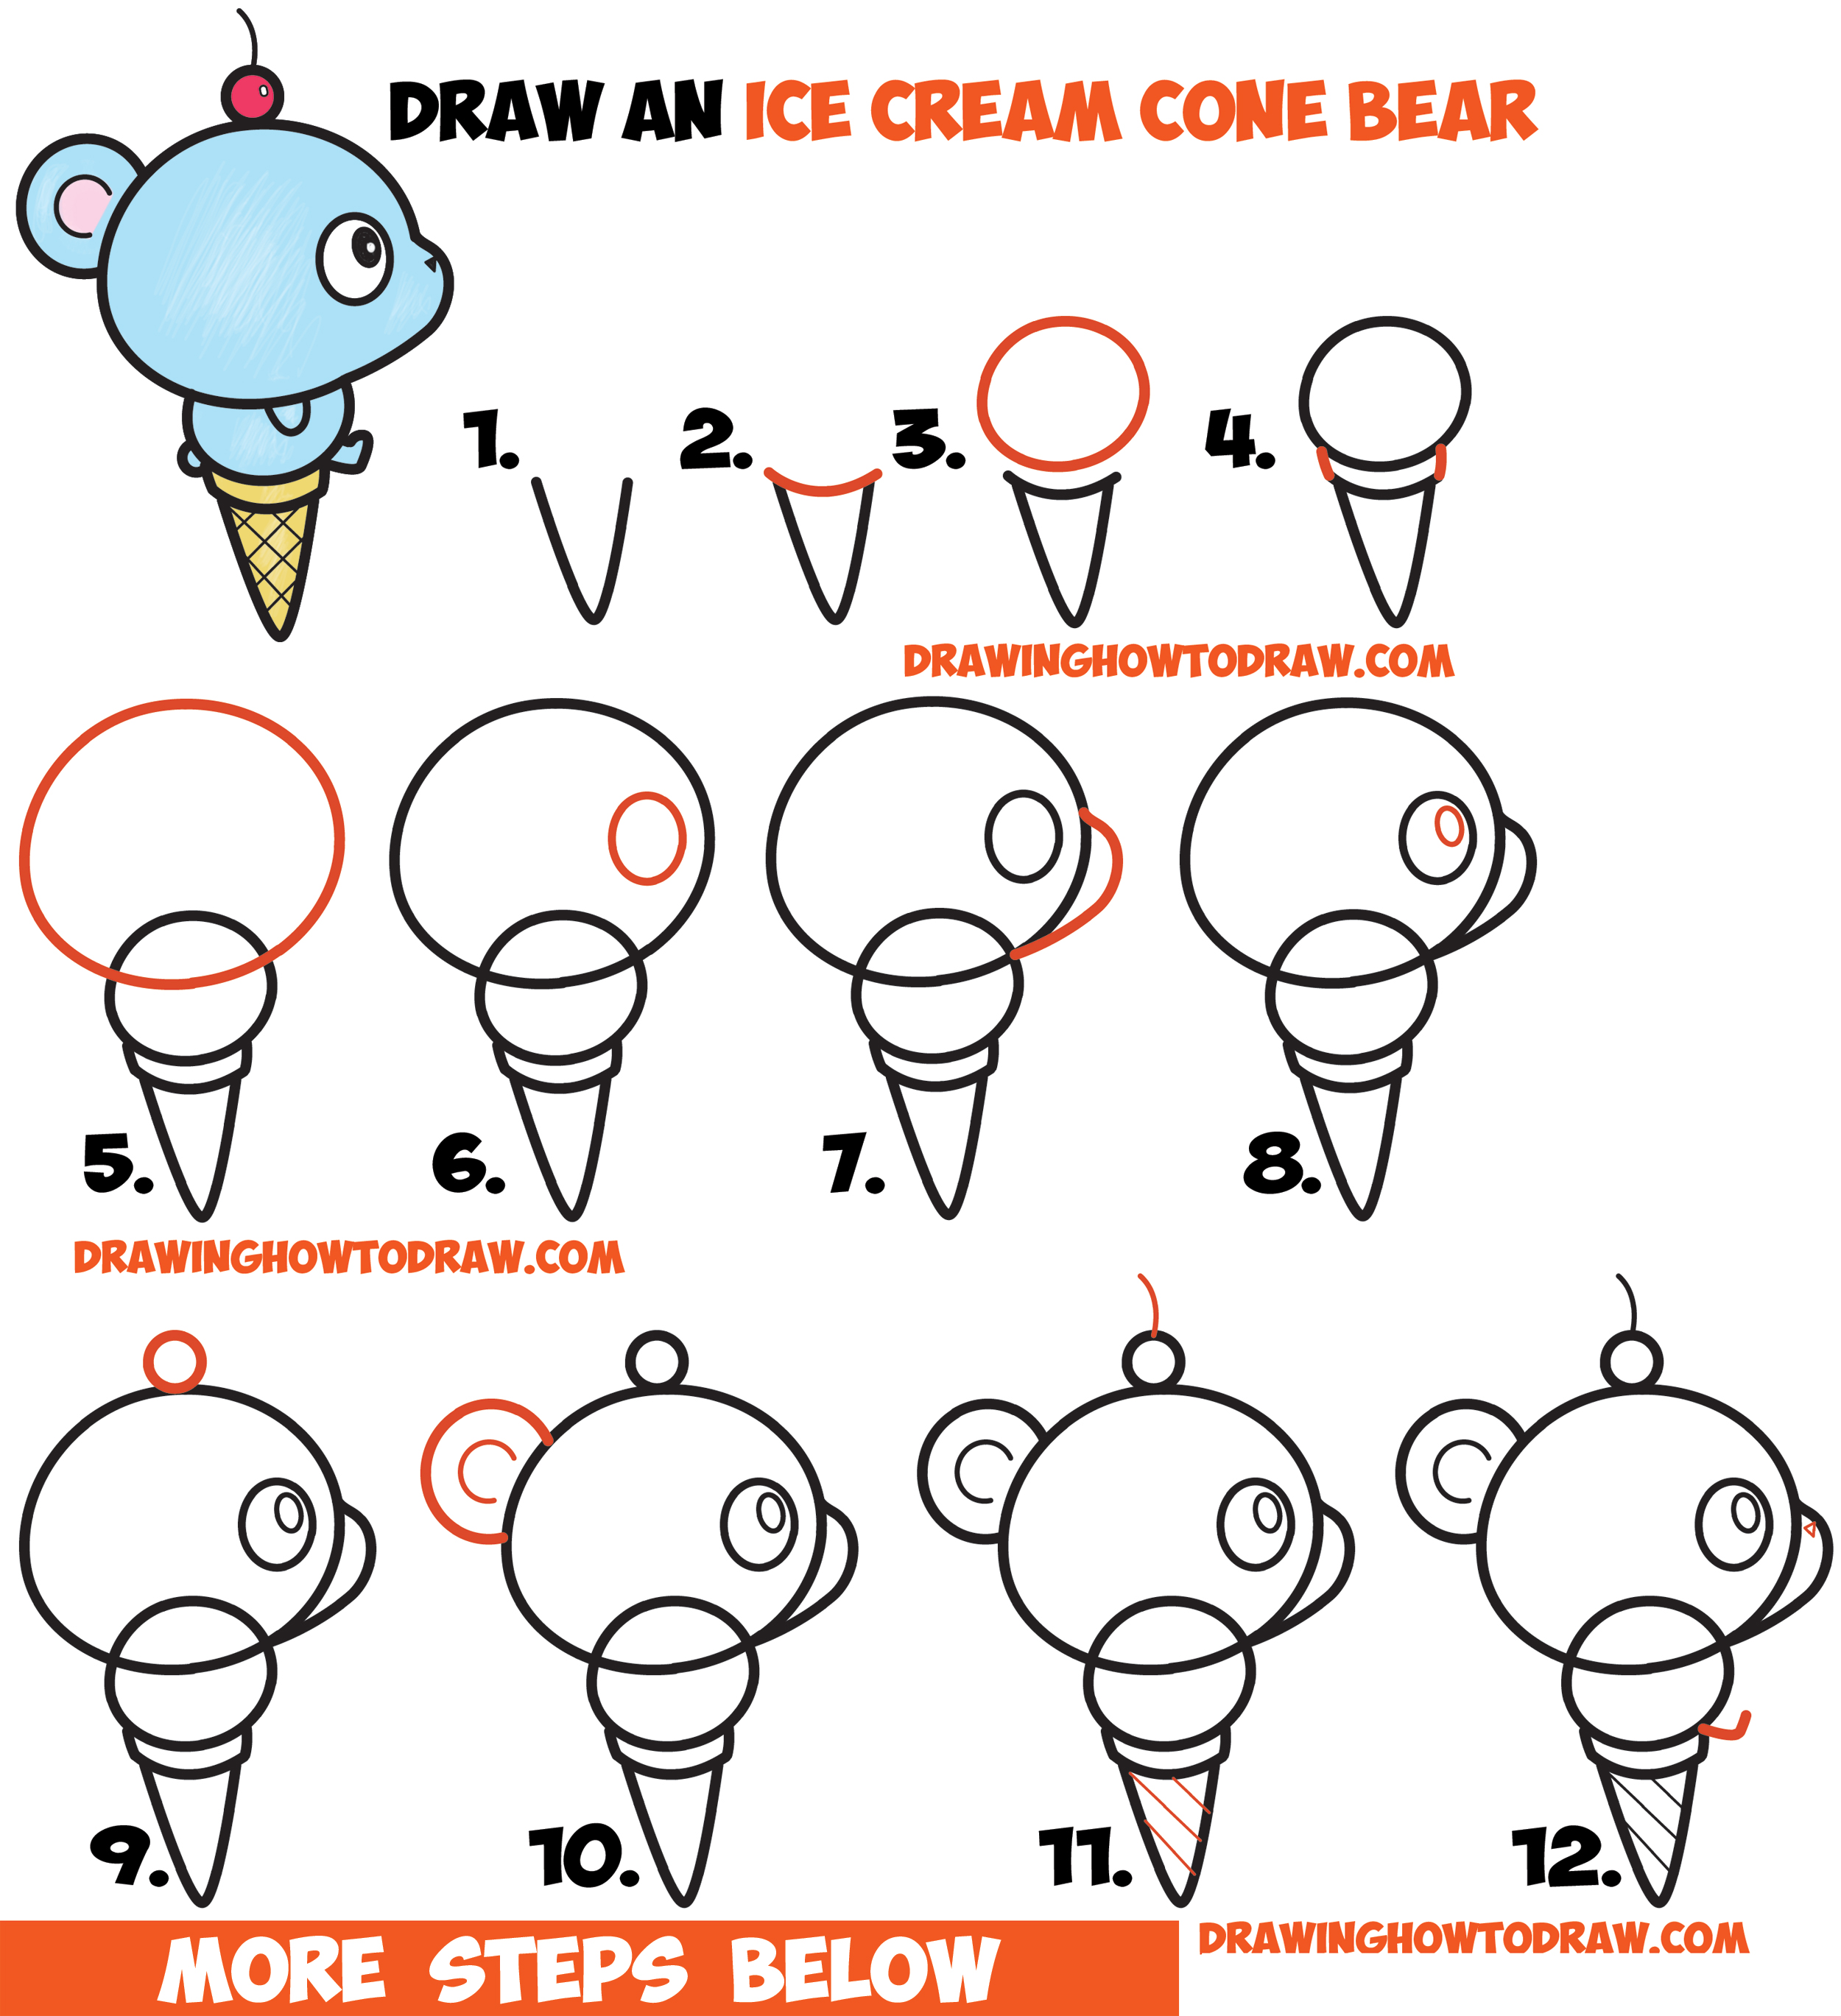 How to draw ice cream drawing | Easy Ice cream drawing - YouTube